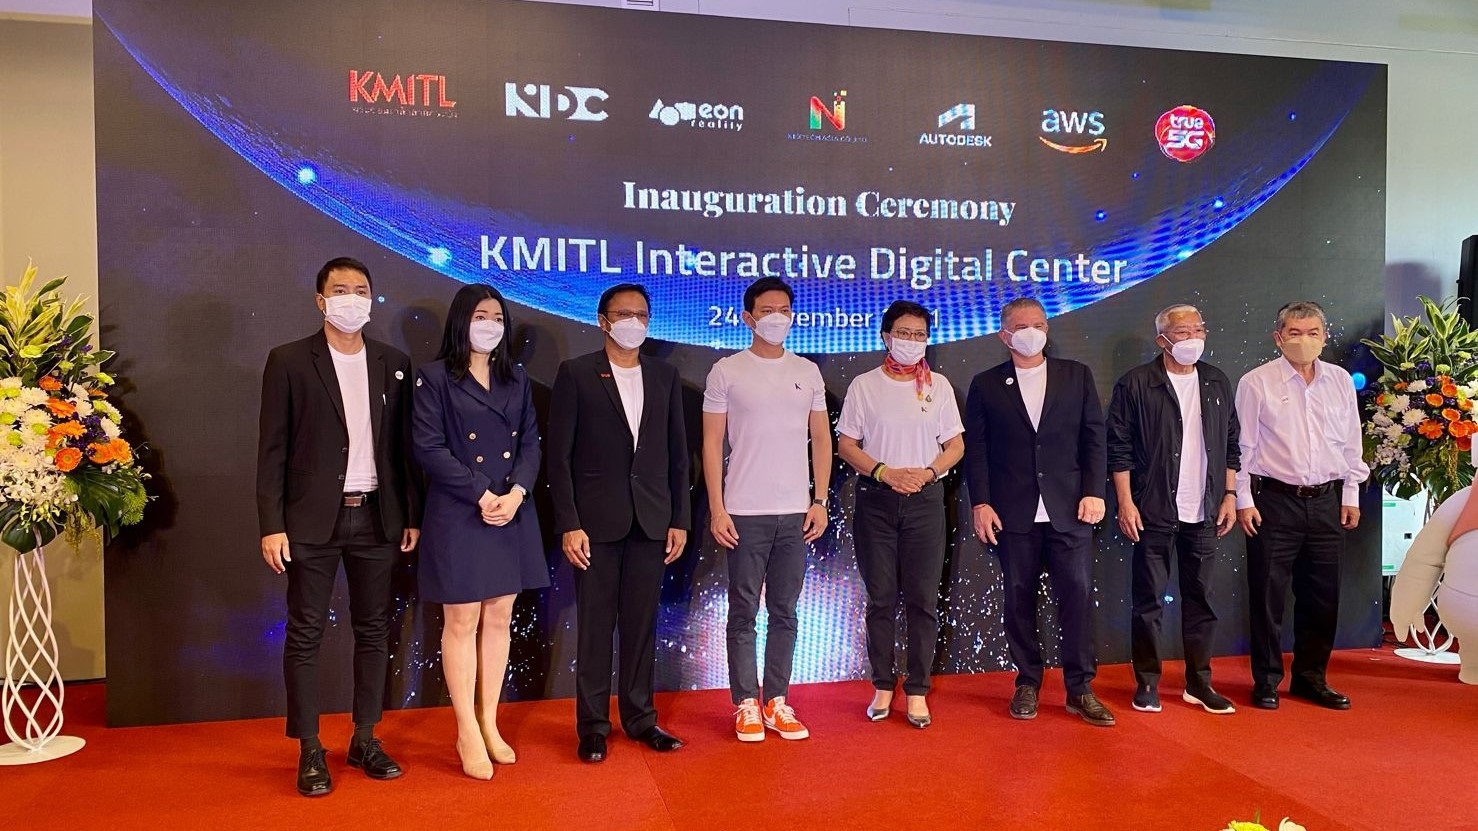 EON Reality and KMITL Inaugurate Brand New Interactive Digital Center in Thailand